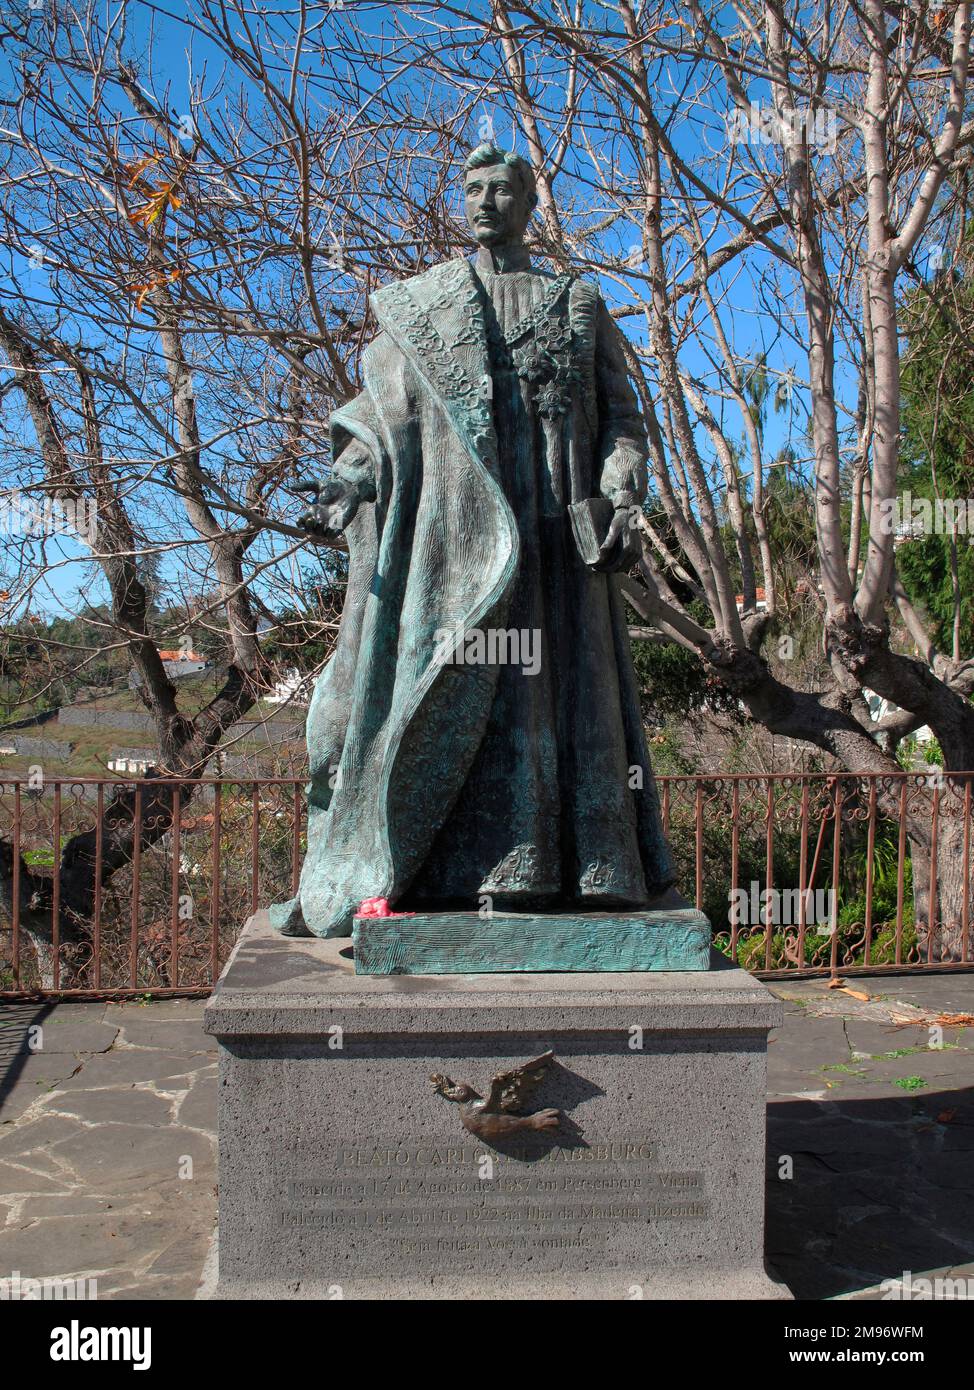 Portugal, Madeira, Funchal, Monte: Statue of the last Habsburg Emperor Karl I. Charles I of Austria or Charles IV of Hungary was, among other titles, the last ruler of the Austro-Hungarian Empire. Stock Photo